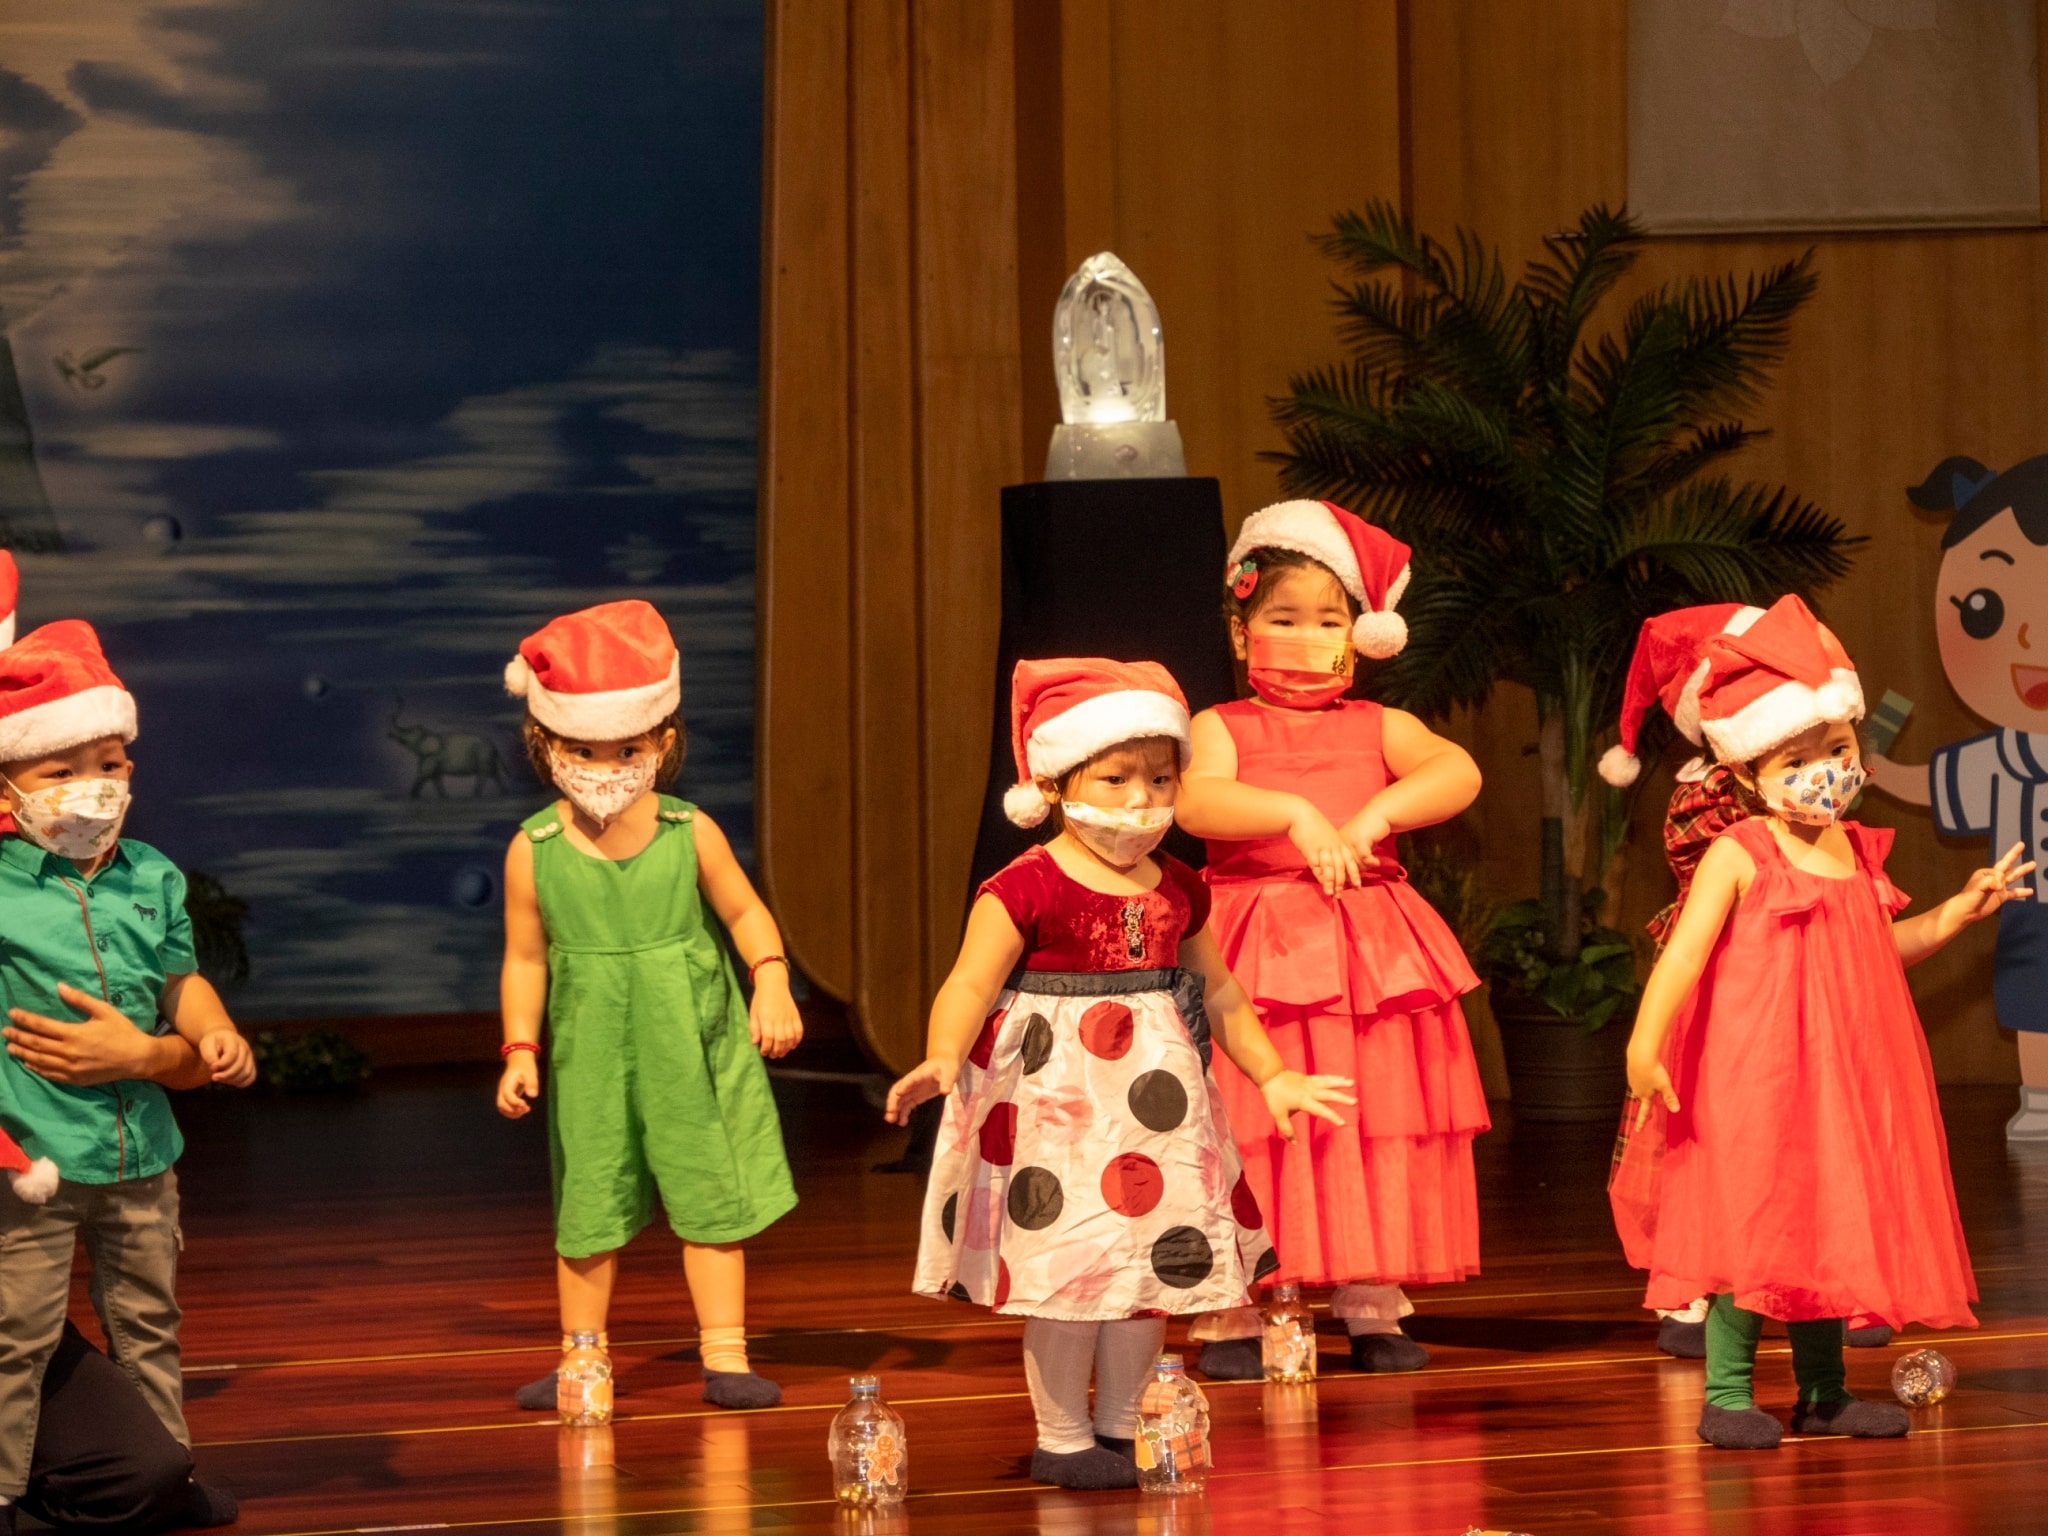 Preschool students showcase their talents in song and dance performances. 【Photo by Harold Alzaga】